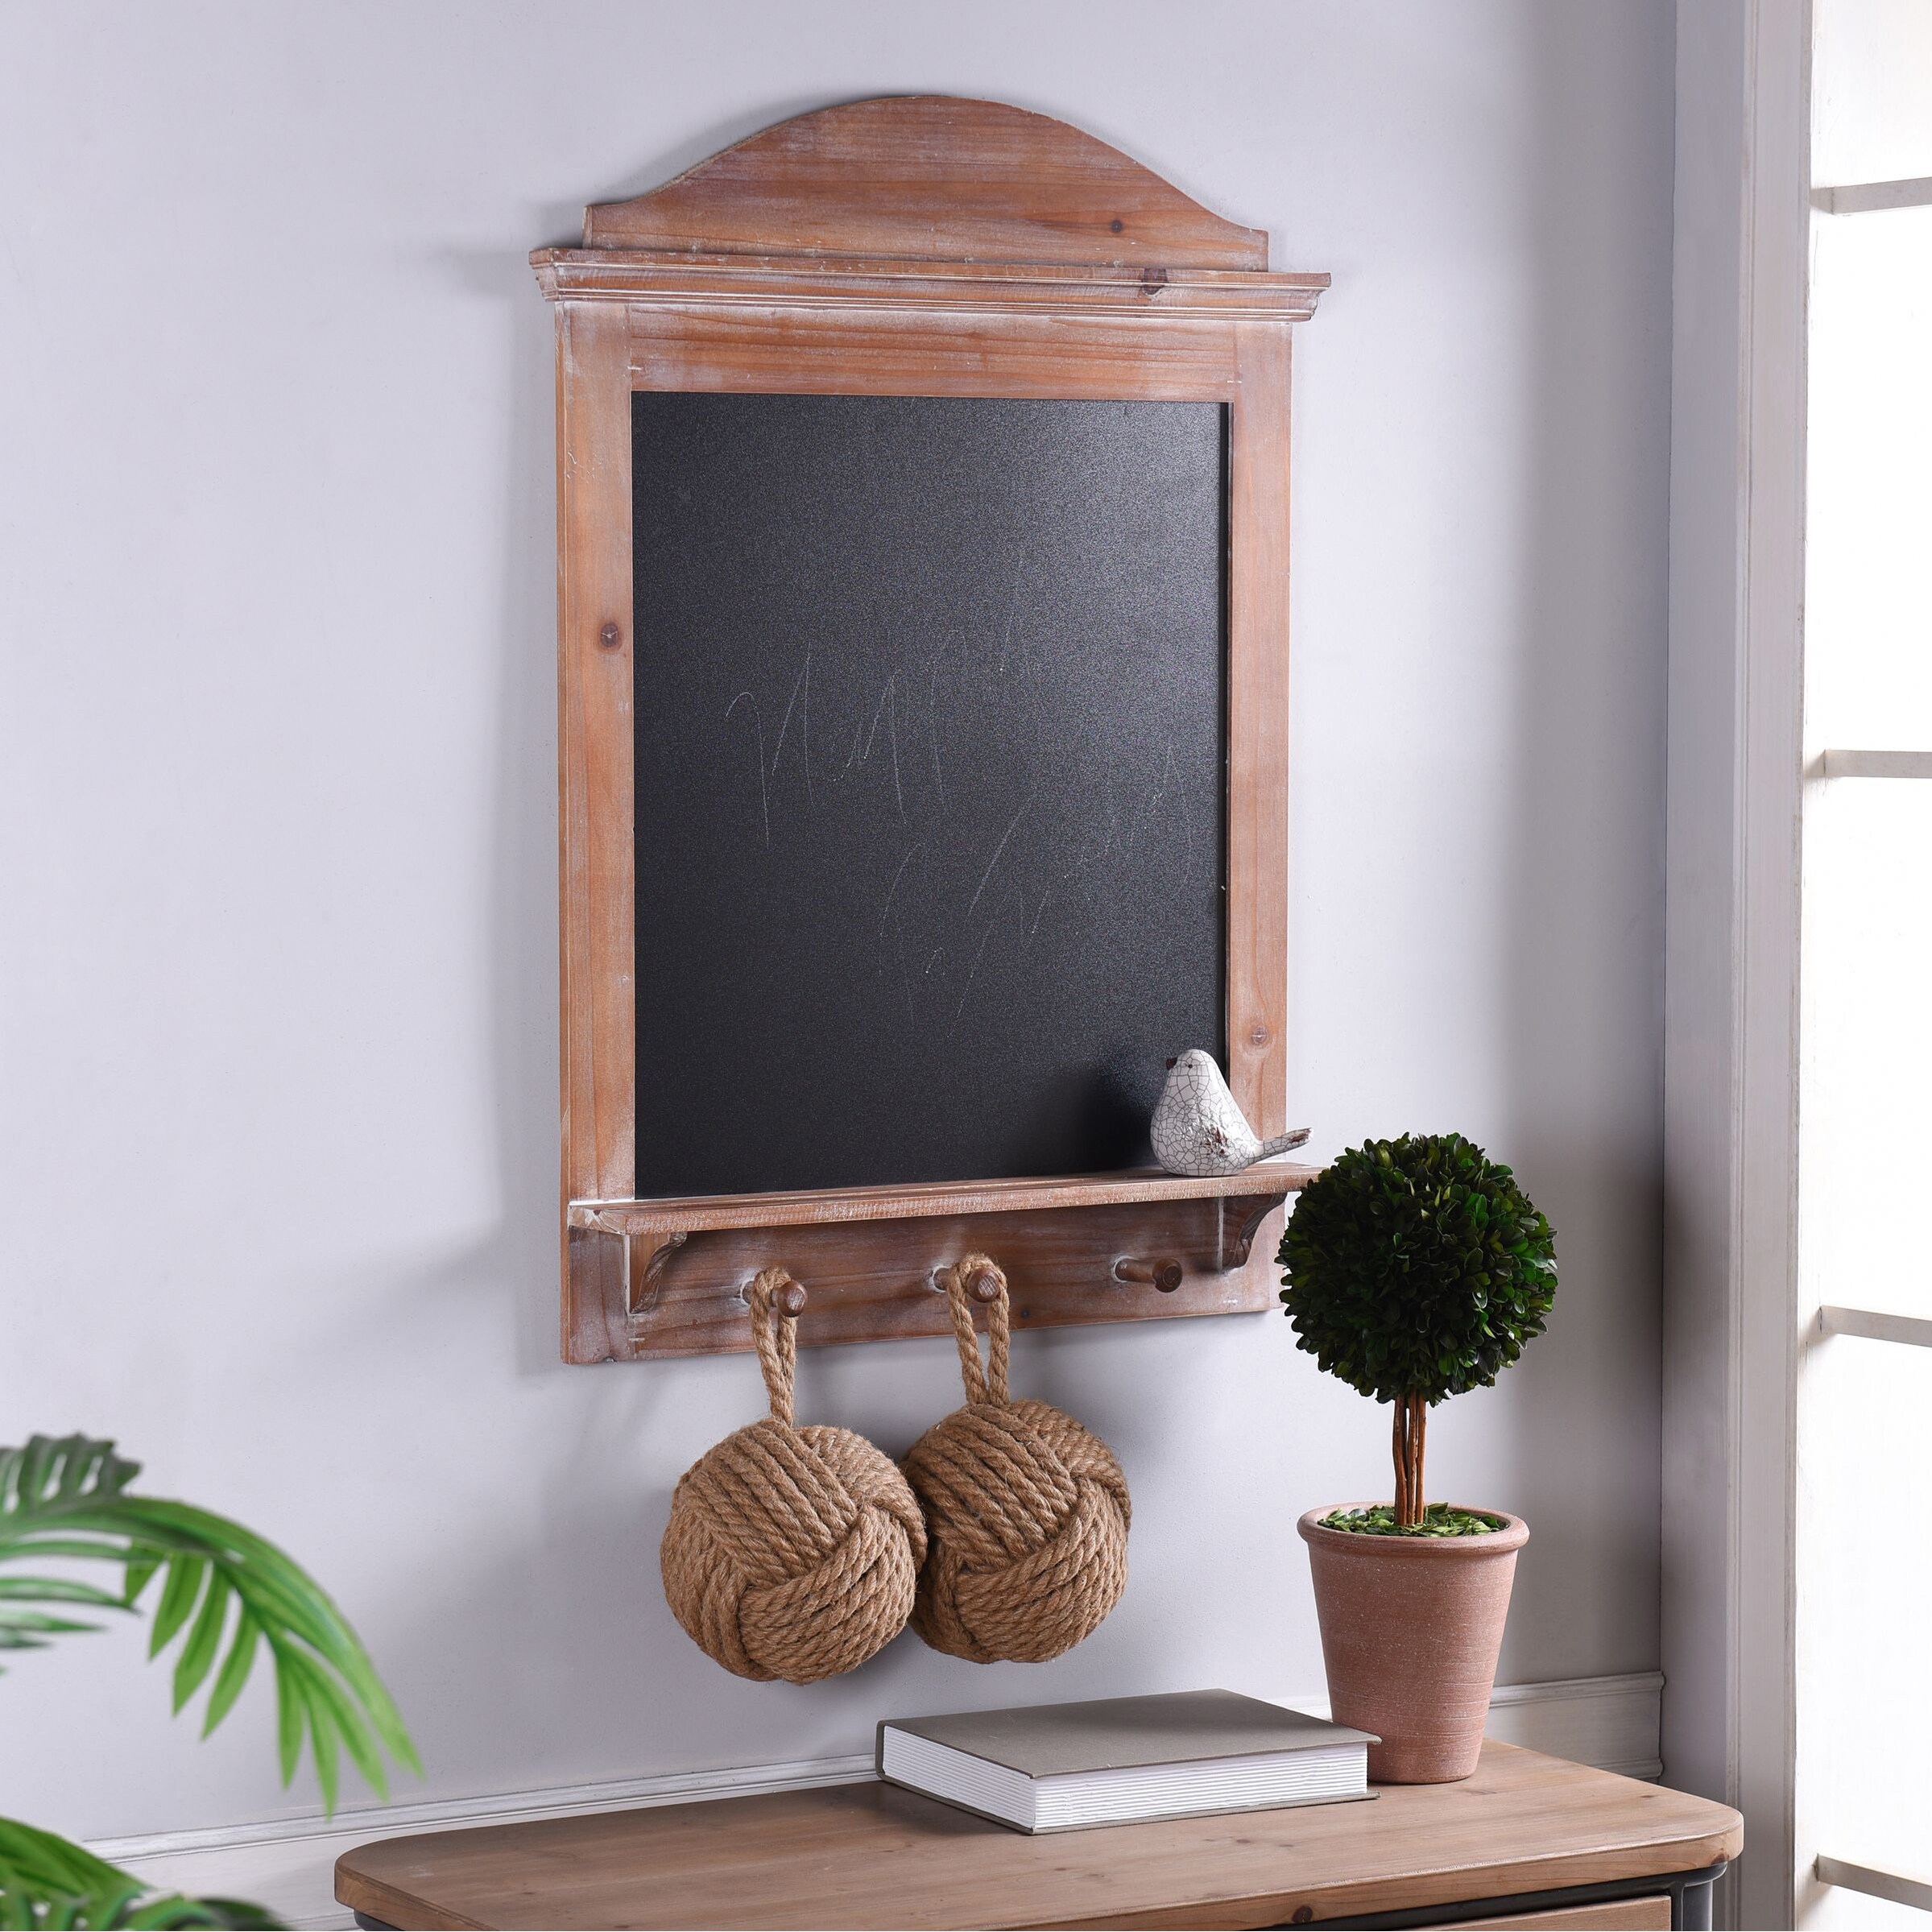 https://ak1.ostkcdn.com/images/products/is/images/direct/bf7f2054d26881aa1fbdce5f3b0cae9fb3fce6eb/Multi-Functional-Wall-Memo-Board---Chalkboard-With-Hanging-Storage.jpg